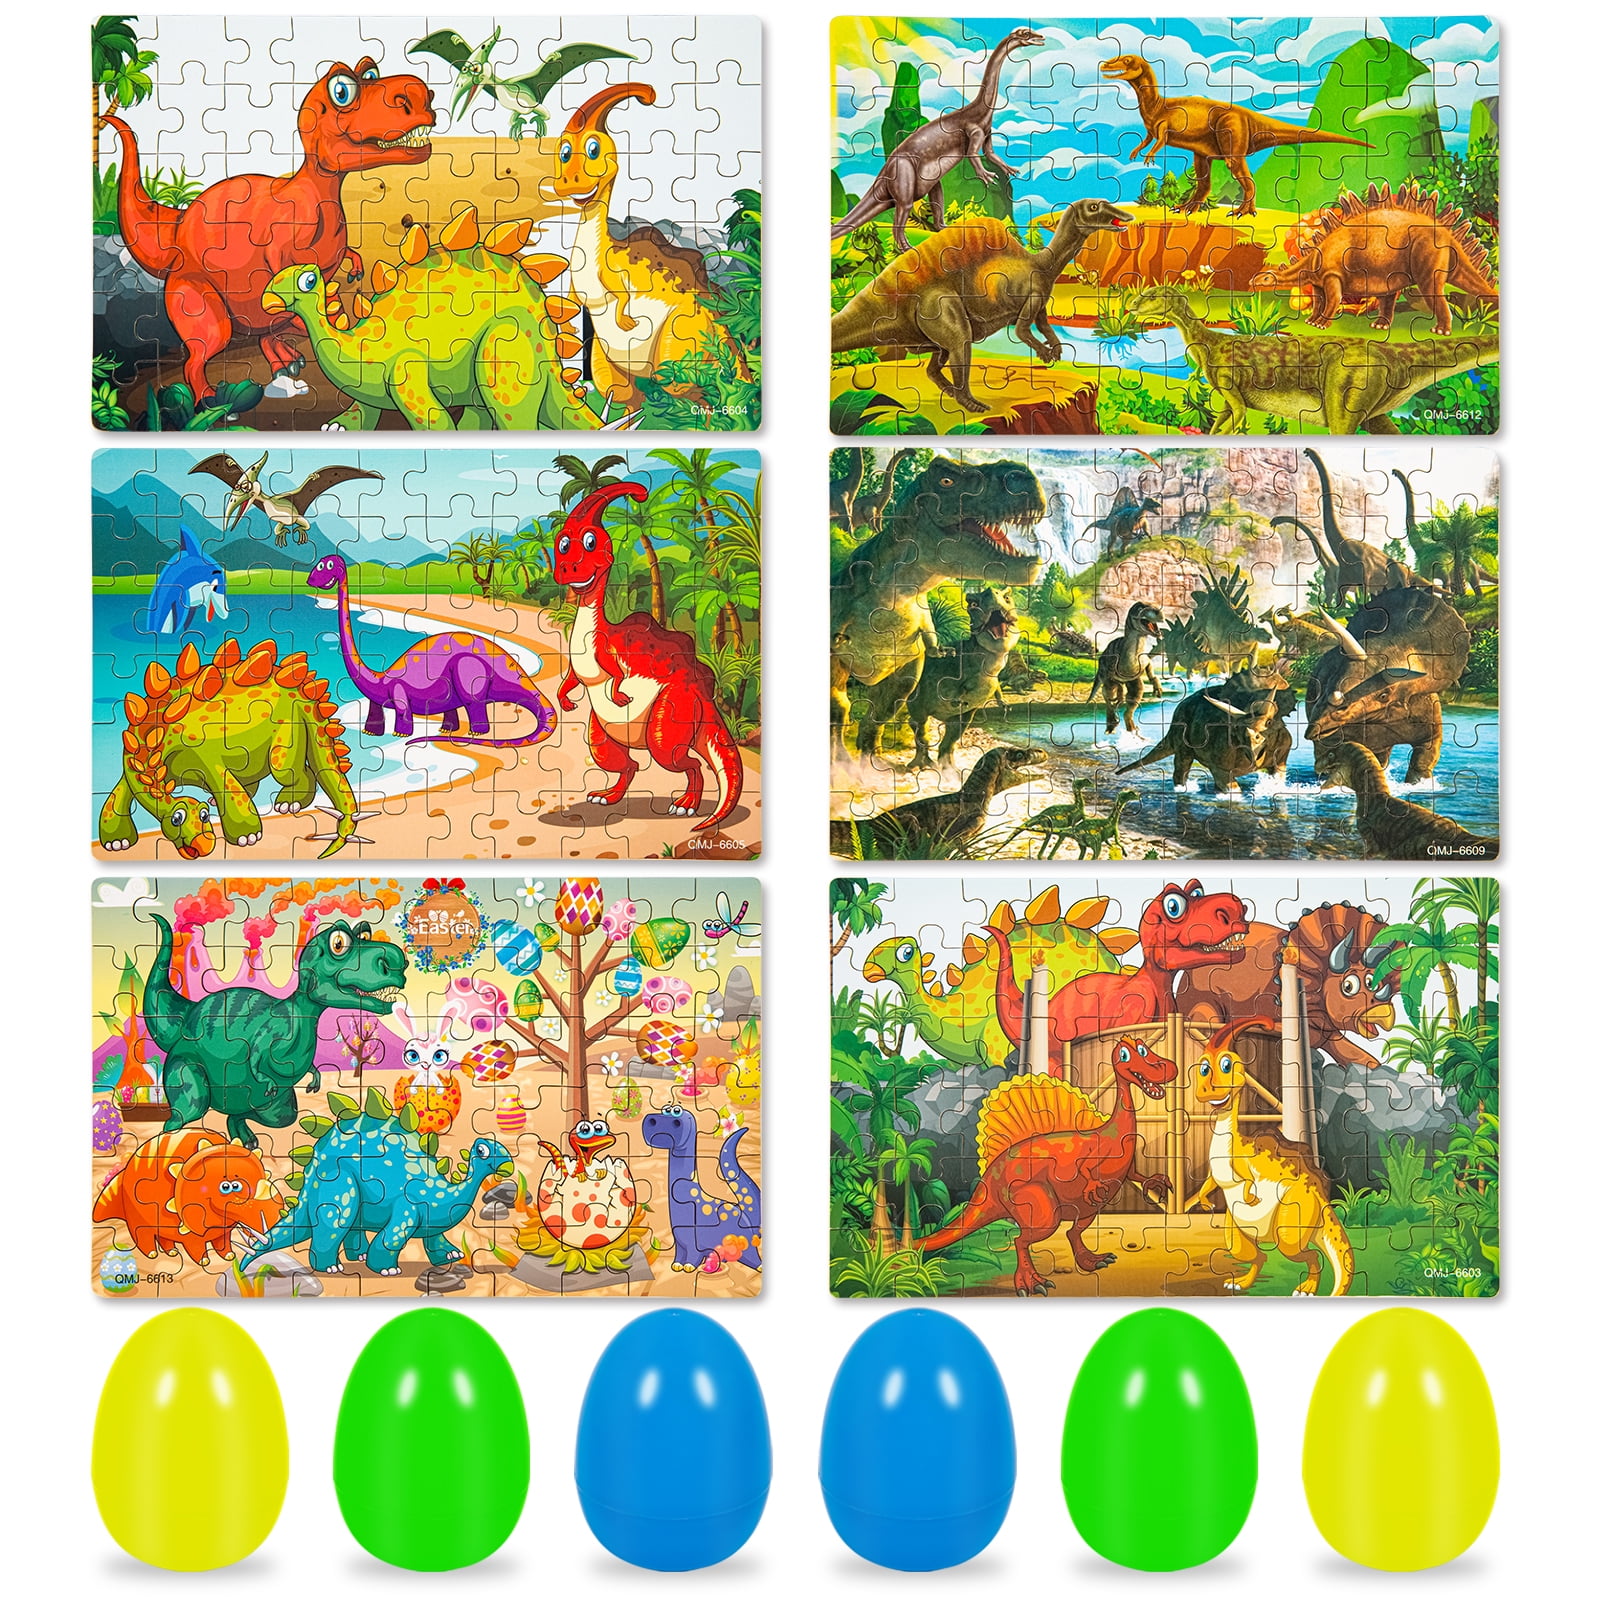 30 DINOSAUR JIGSAW PUZZLES PARTY LOOT BAG TOYS FAVOURS Clearance Sale!!! 